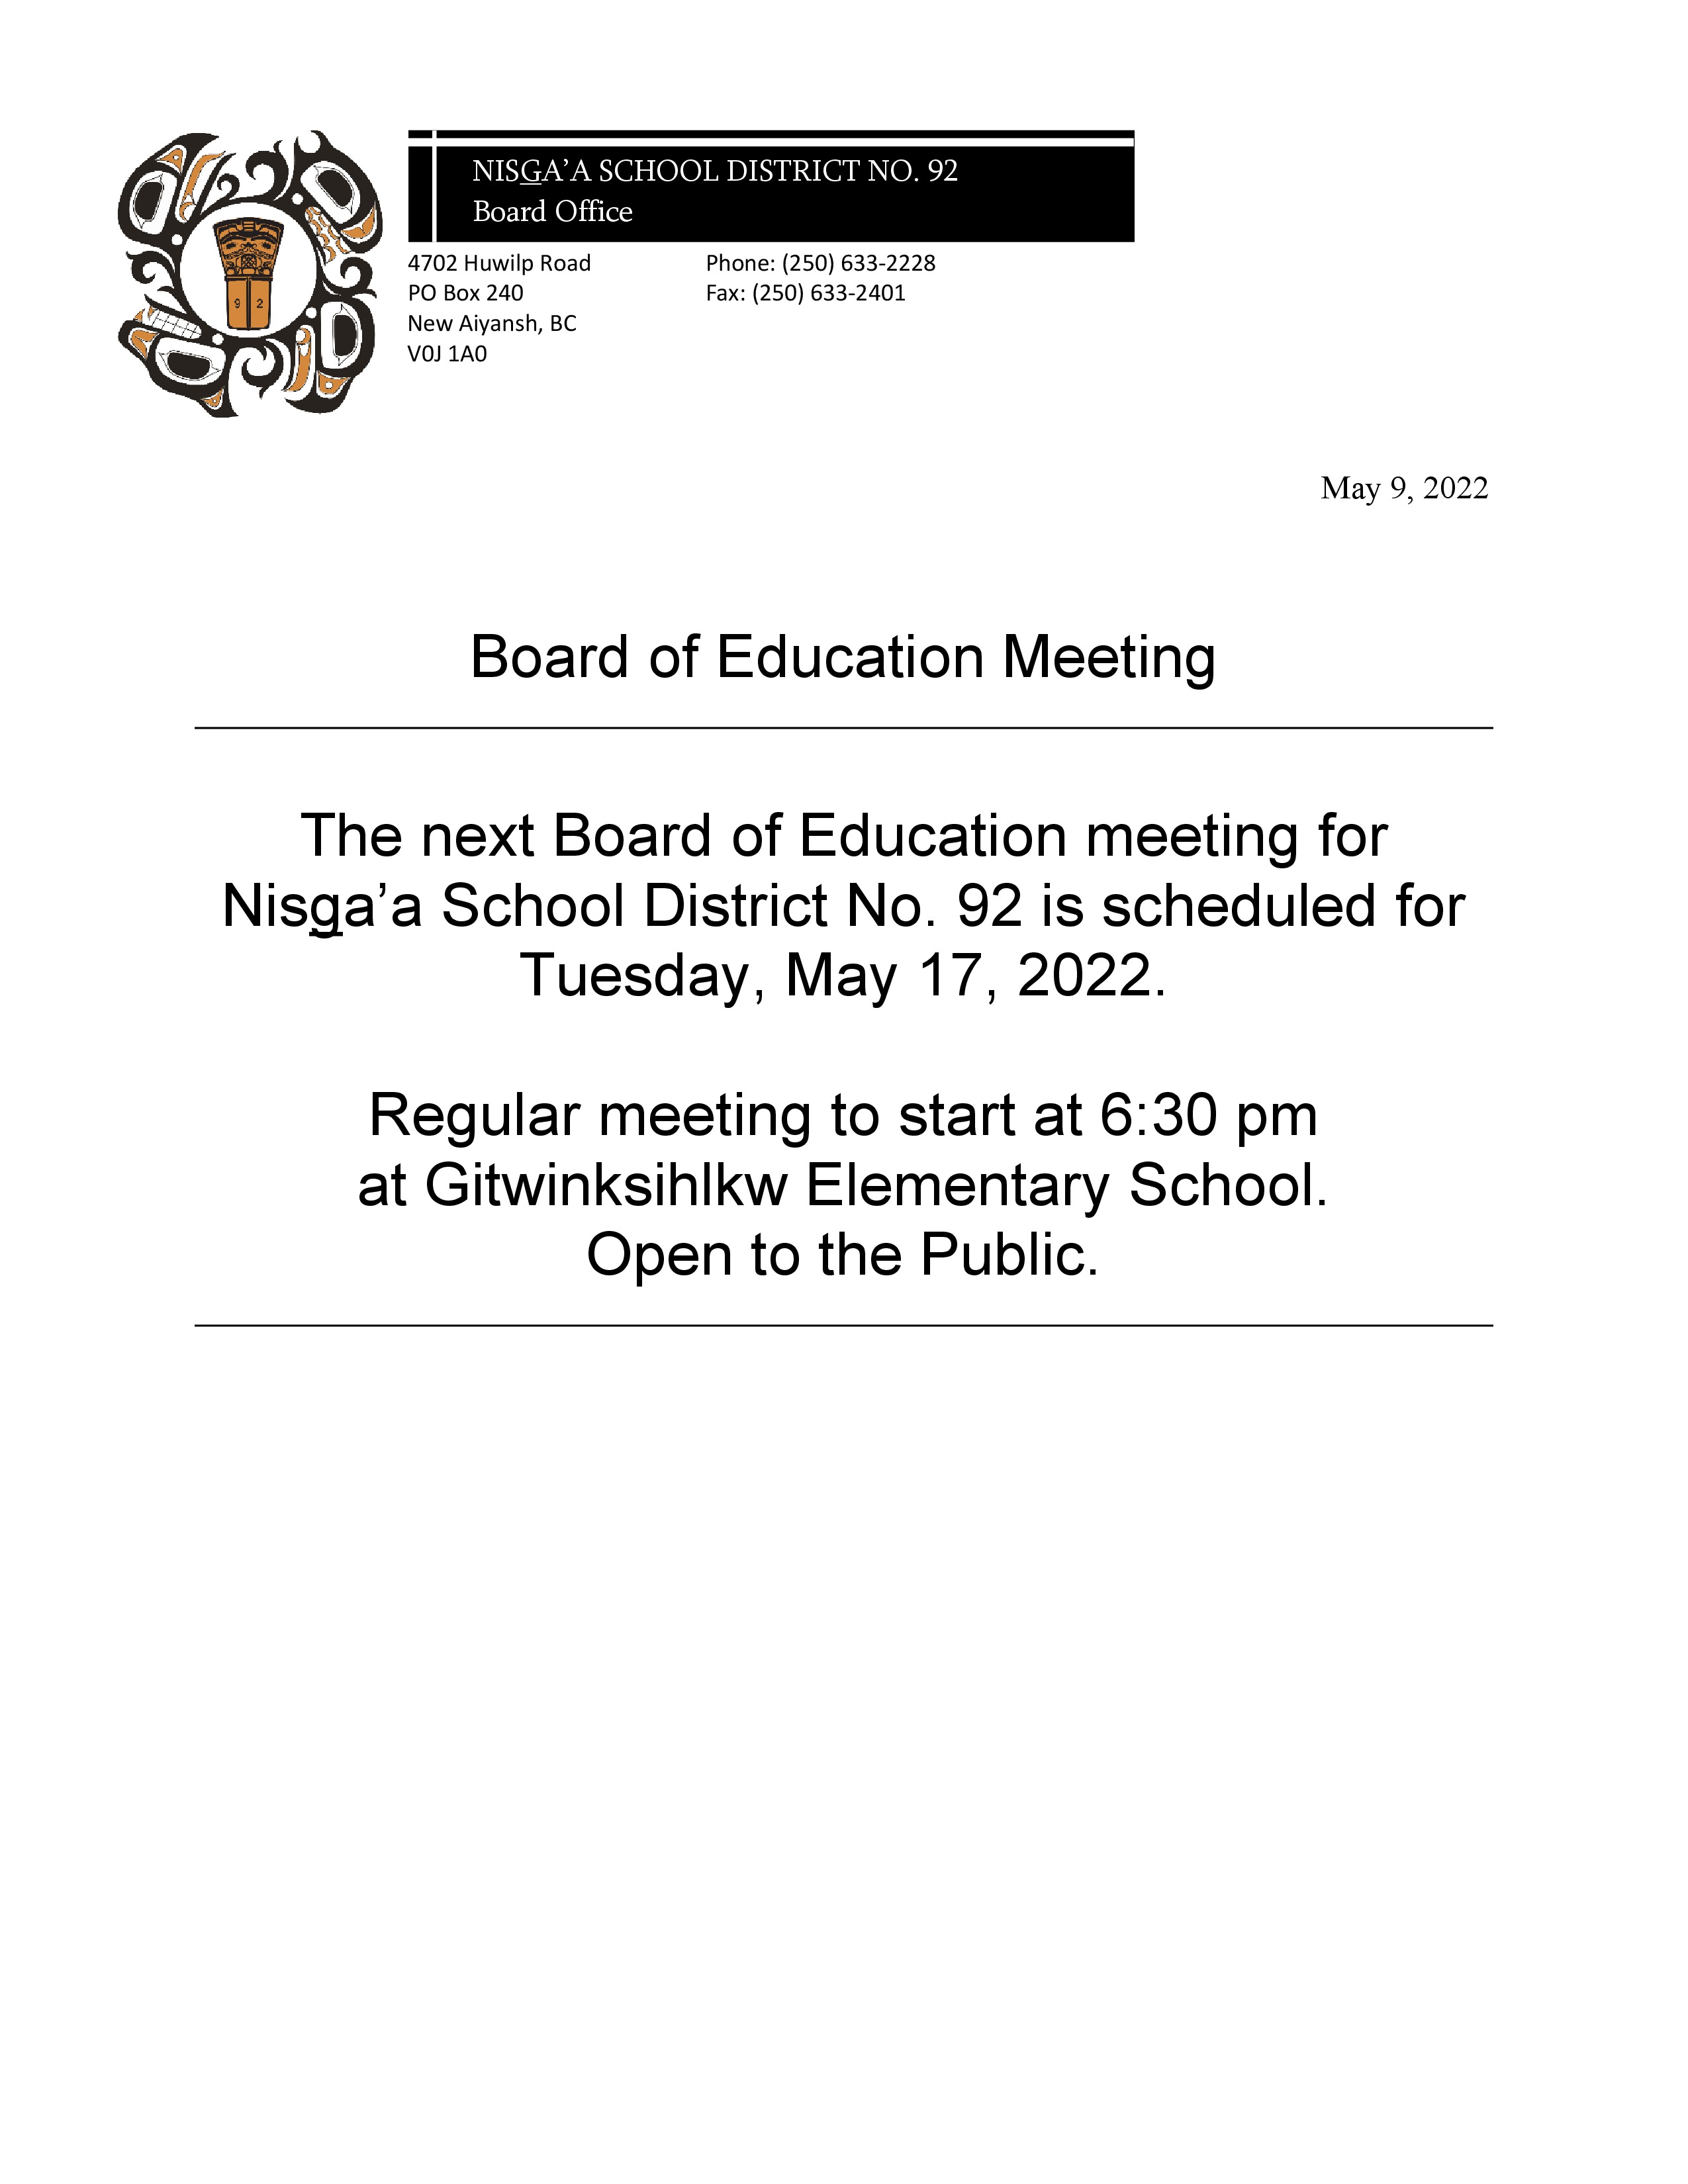 Board of Education Meeting Announcement: Tuesday, May 17, 2022.